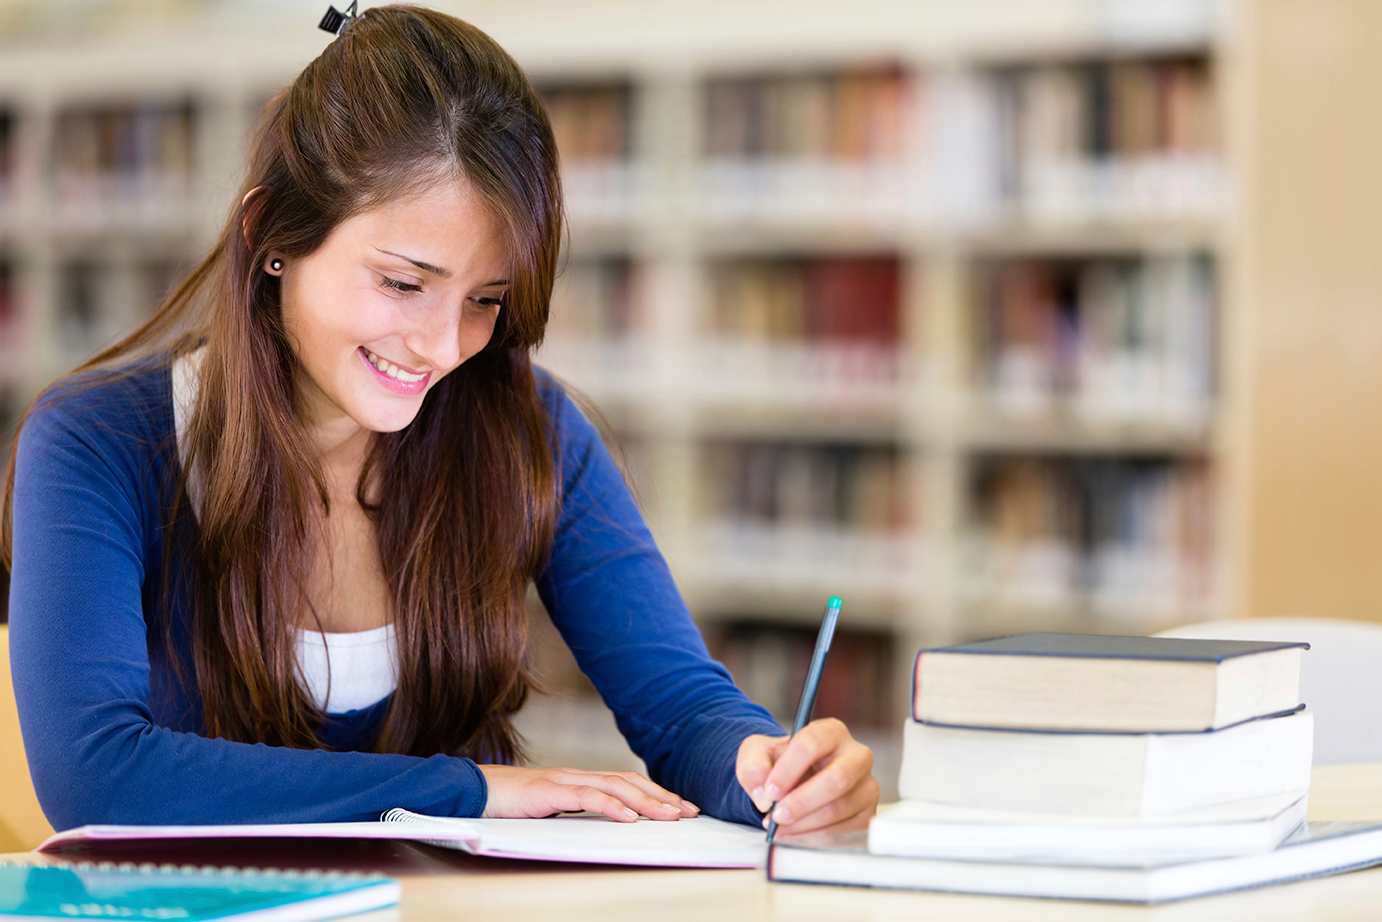 A-level Maths Tutor: The Best Ways to Prepare for Exams 